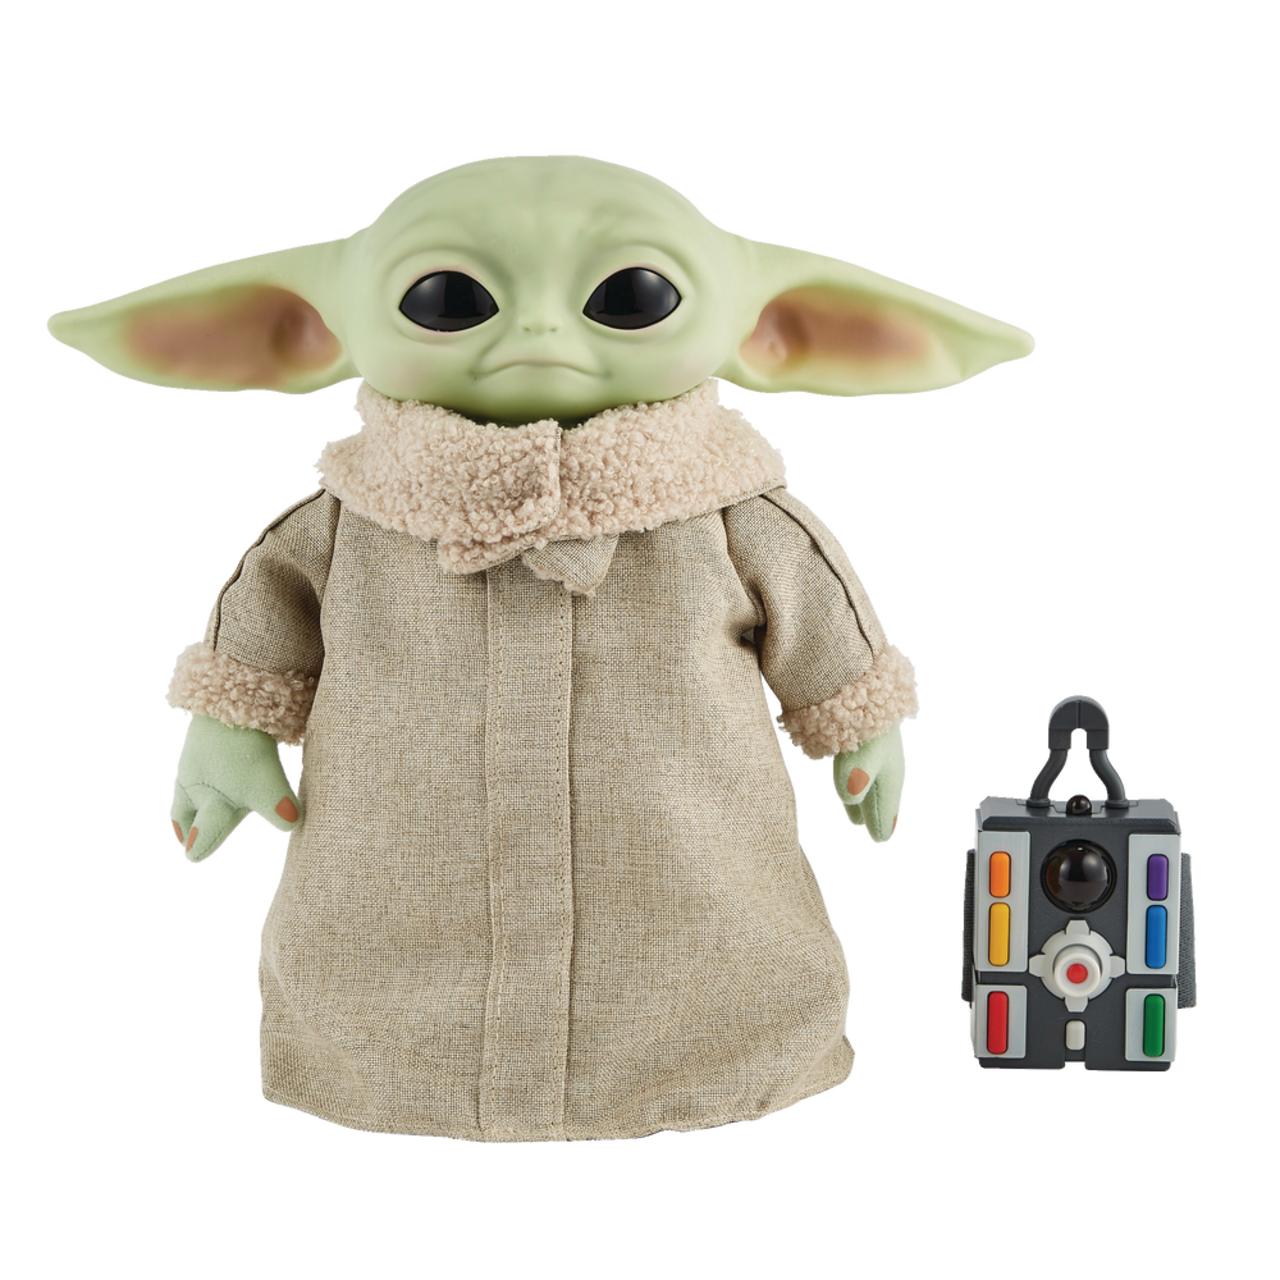 https://media-www.canadiantire.ca/product/seasonal-gardening/toys/toys-games/0508499/star-wars-the-mandalorian-the-child-real-moves-plush-061e2e9e-3ab5-4dc0-9e1b-68367a8be1d8.png?imdensity=1&imwidth=640&impolicy=mZoom